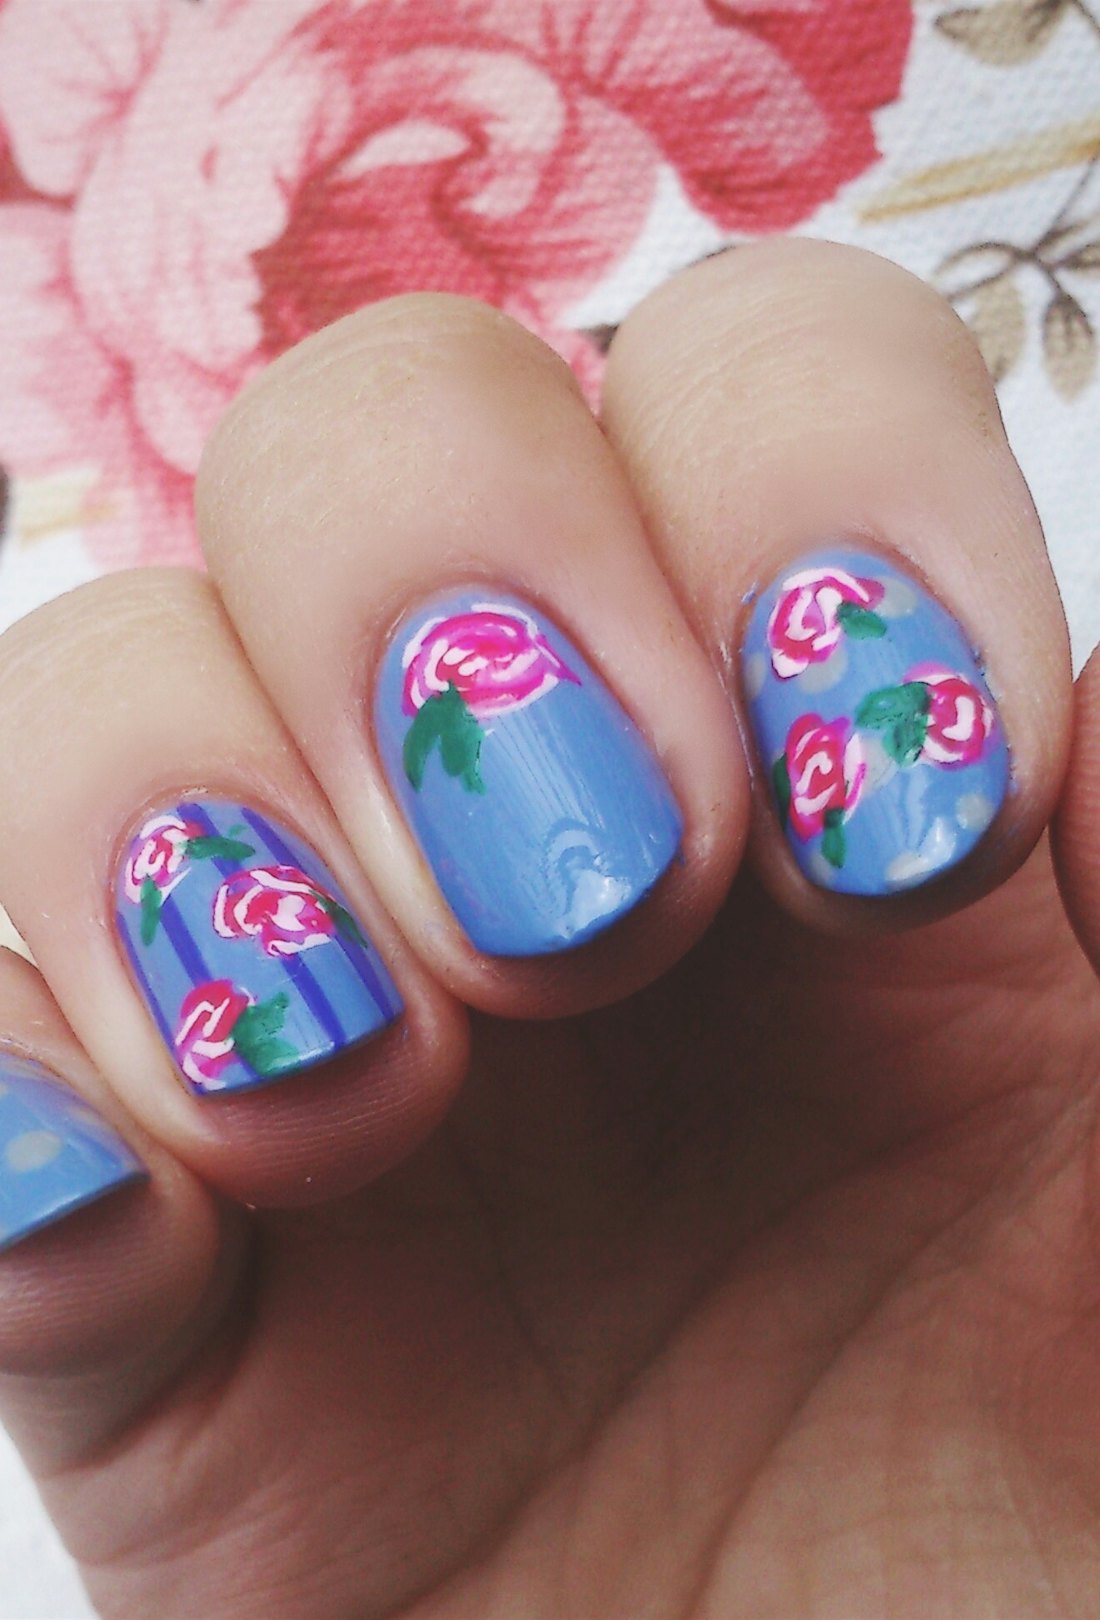 Purple manicured nails with light and dark pink floral nail designs.